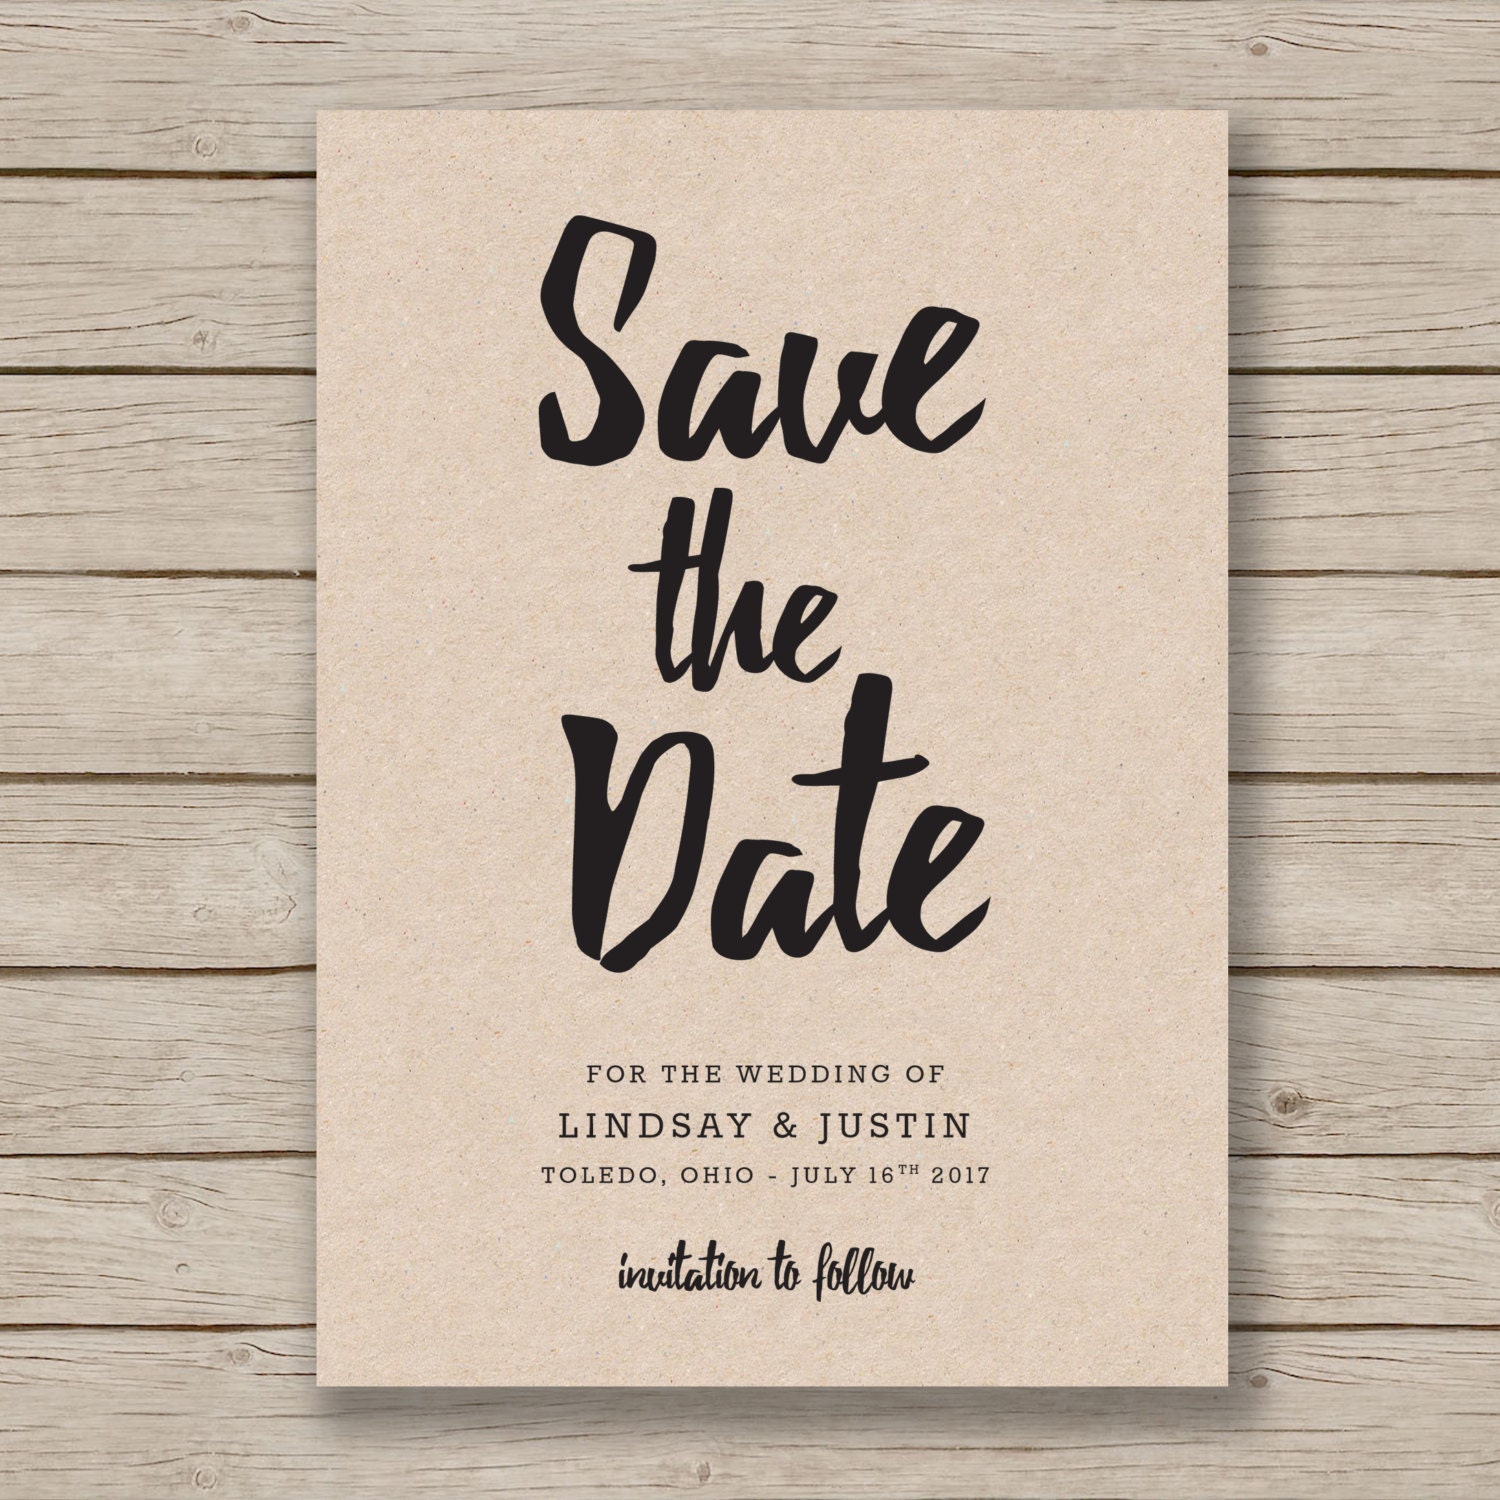 save-the-date-template-editable-by-you-in-word-diy-wedding